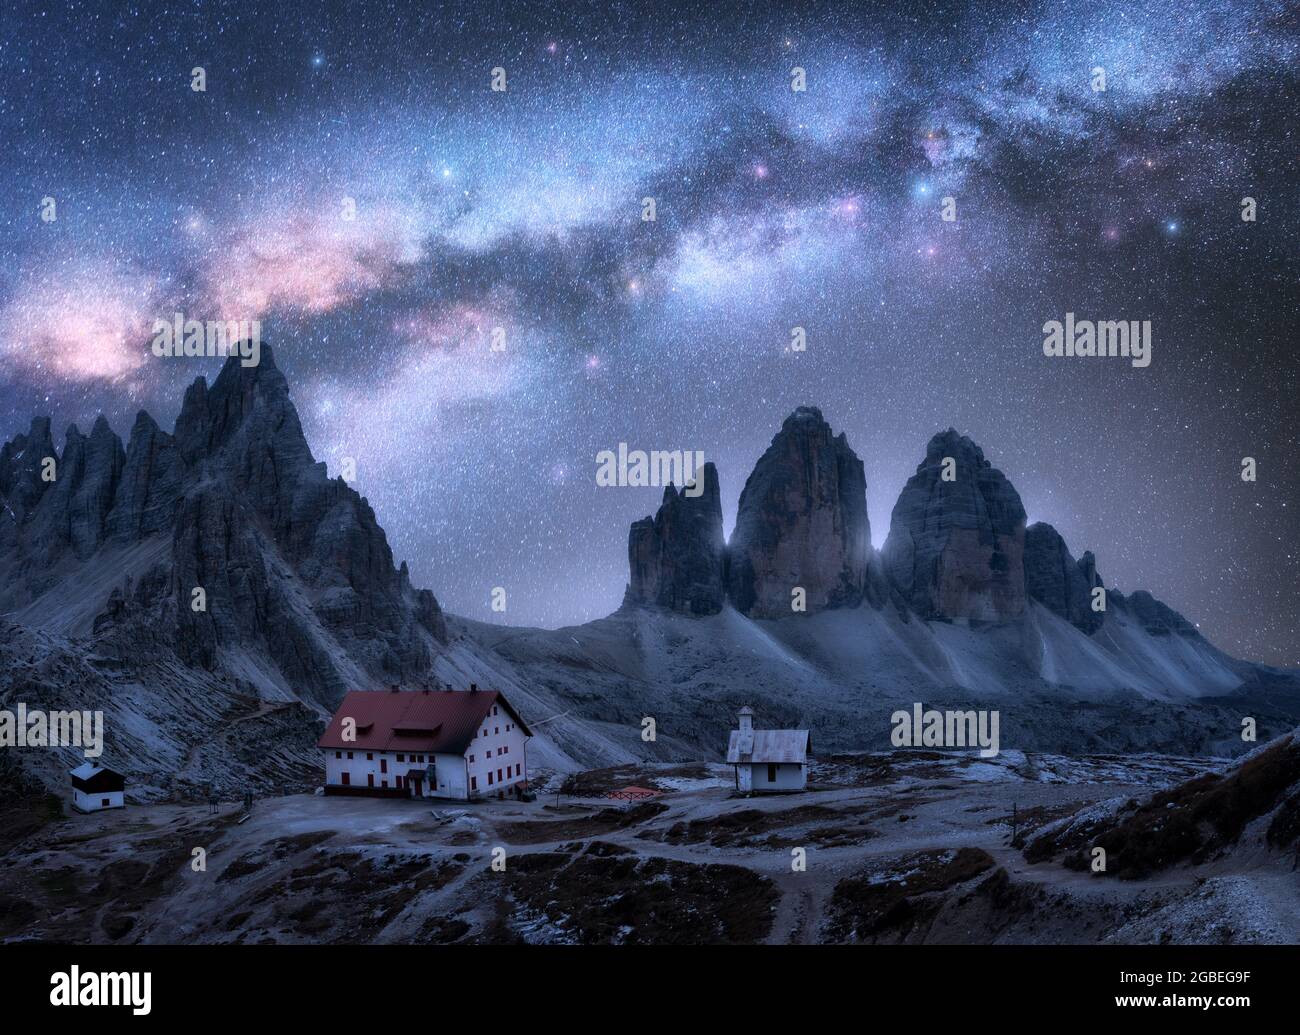 Milky Way over the mountains at starry night in summer Stock Photo